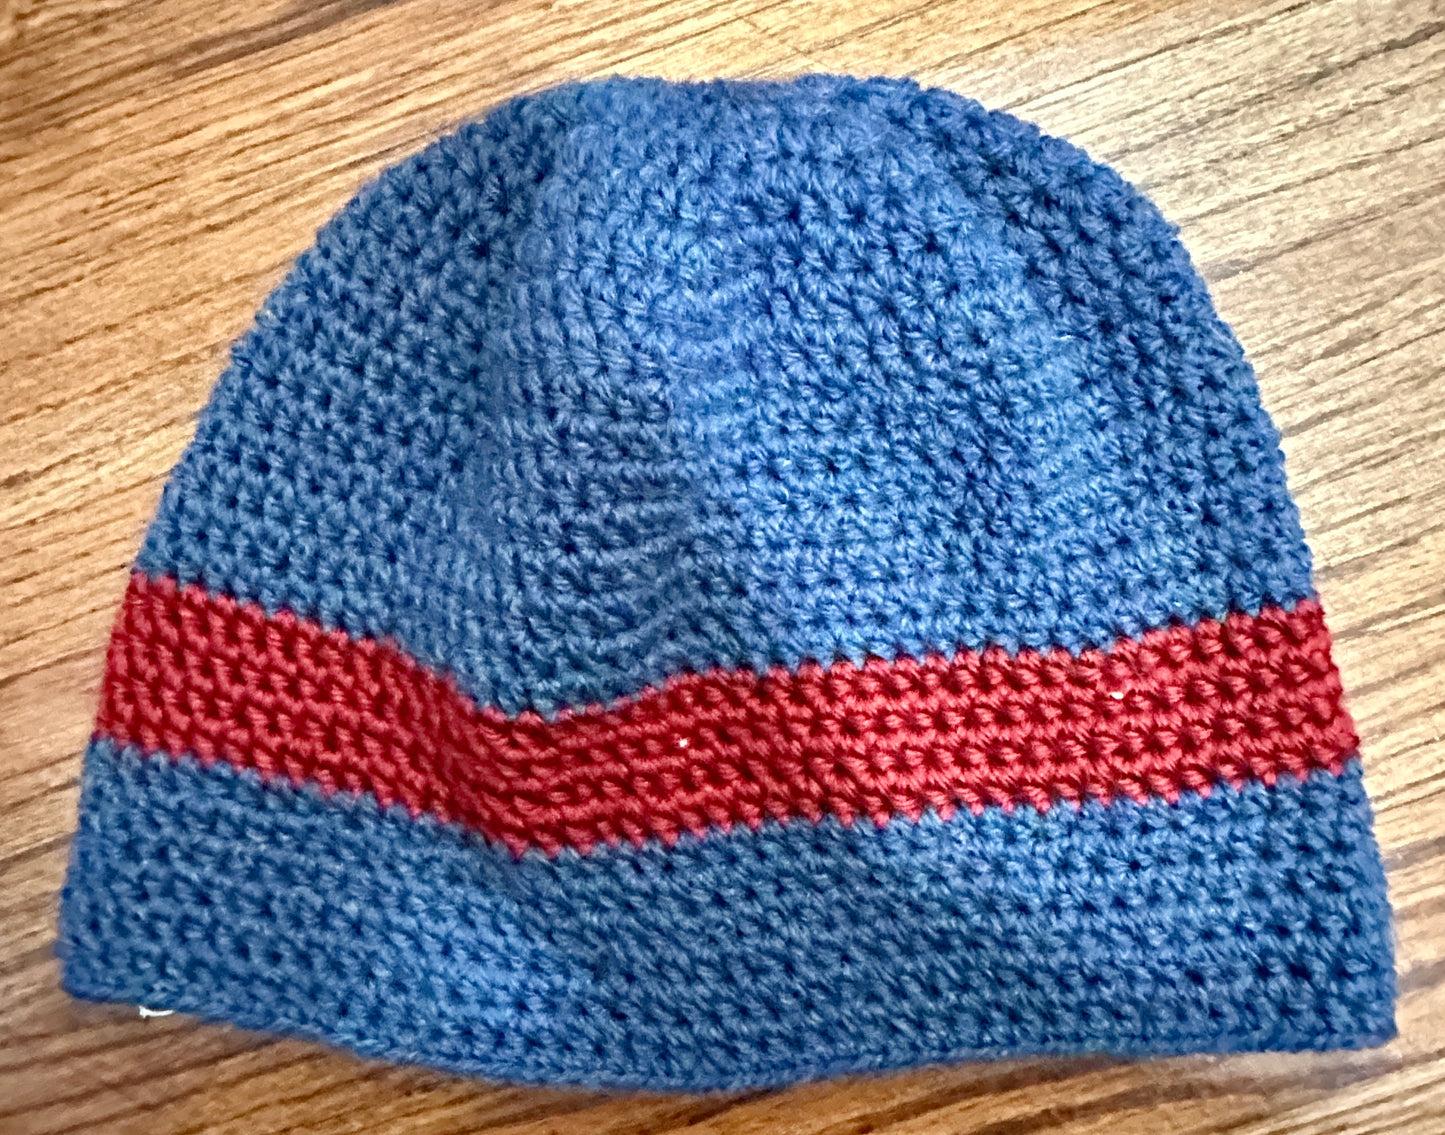 Blue and Red Crocheted Adult Hat by Nancy Stratman